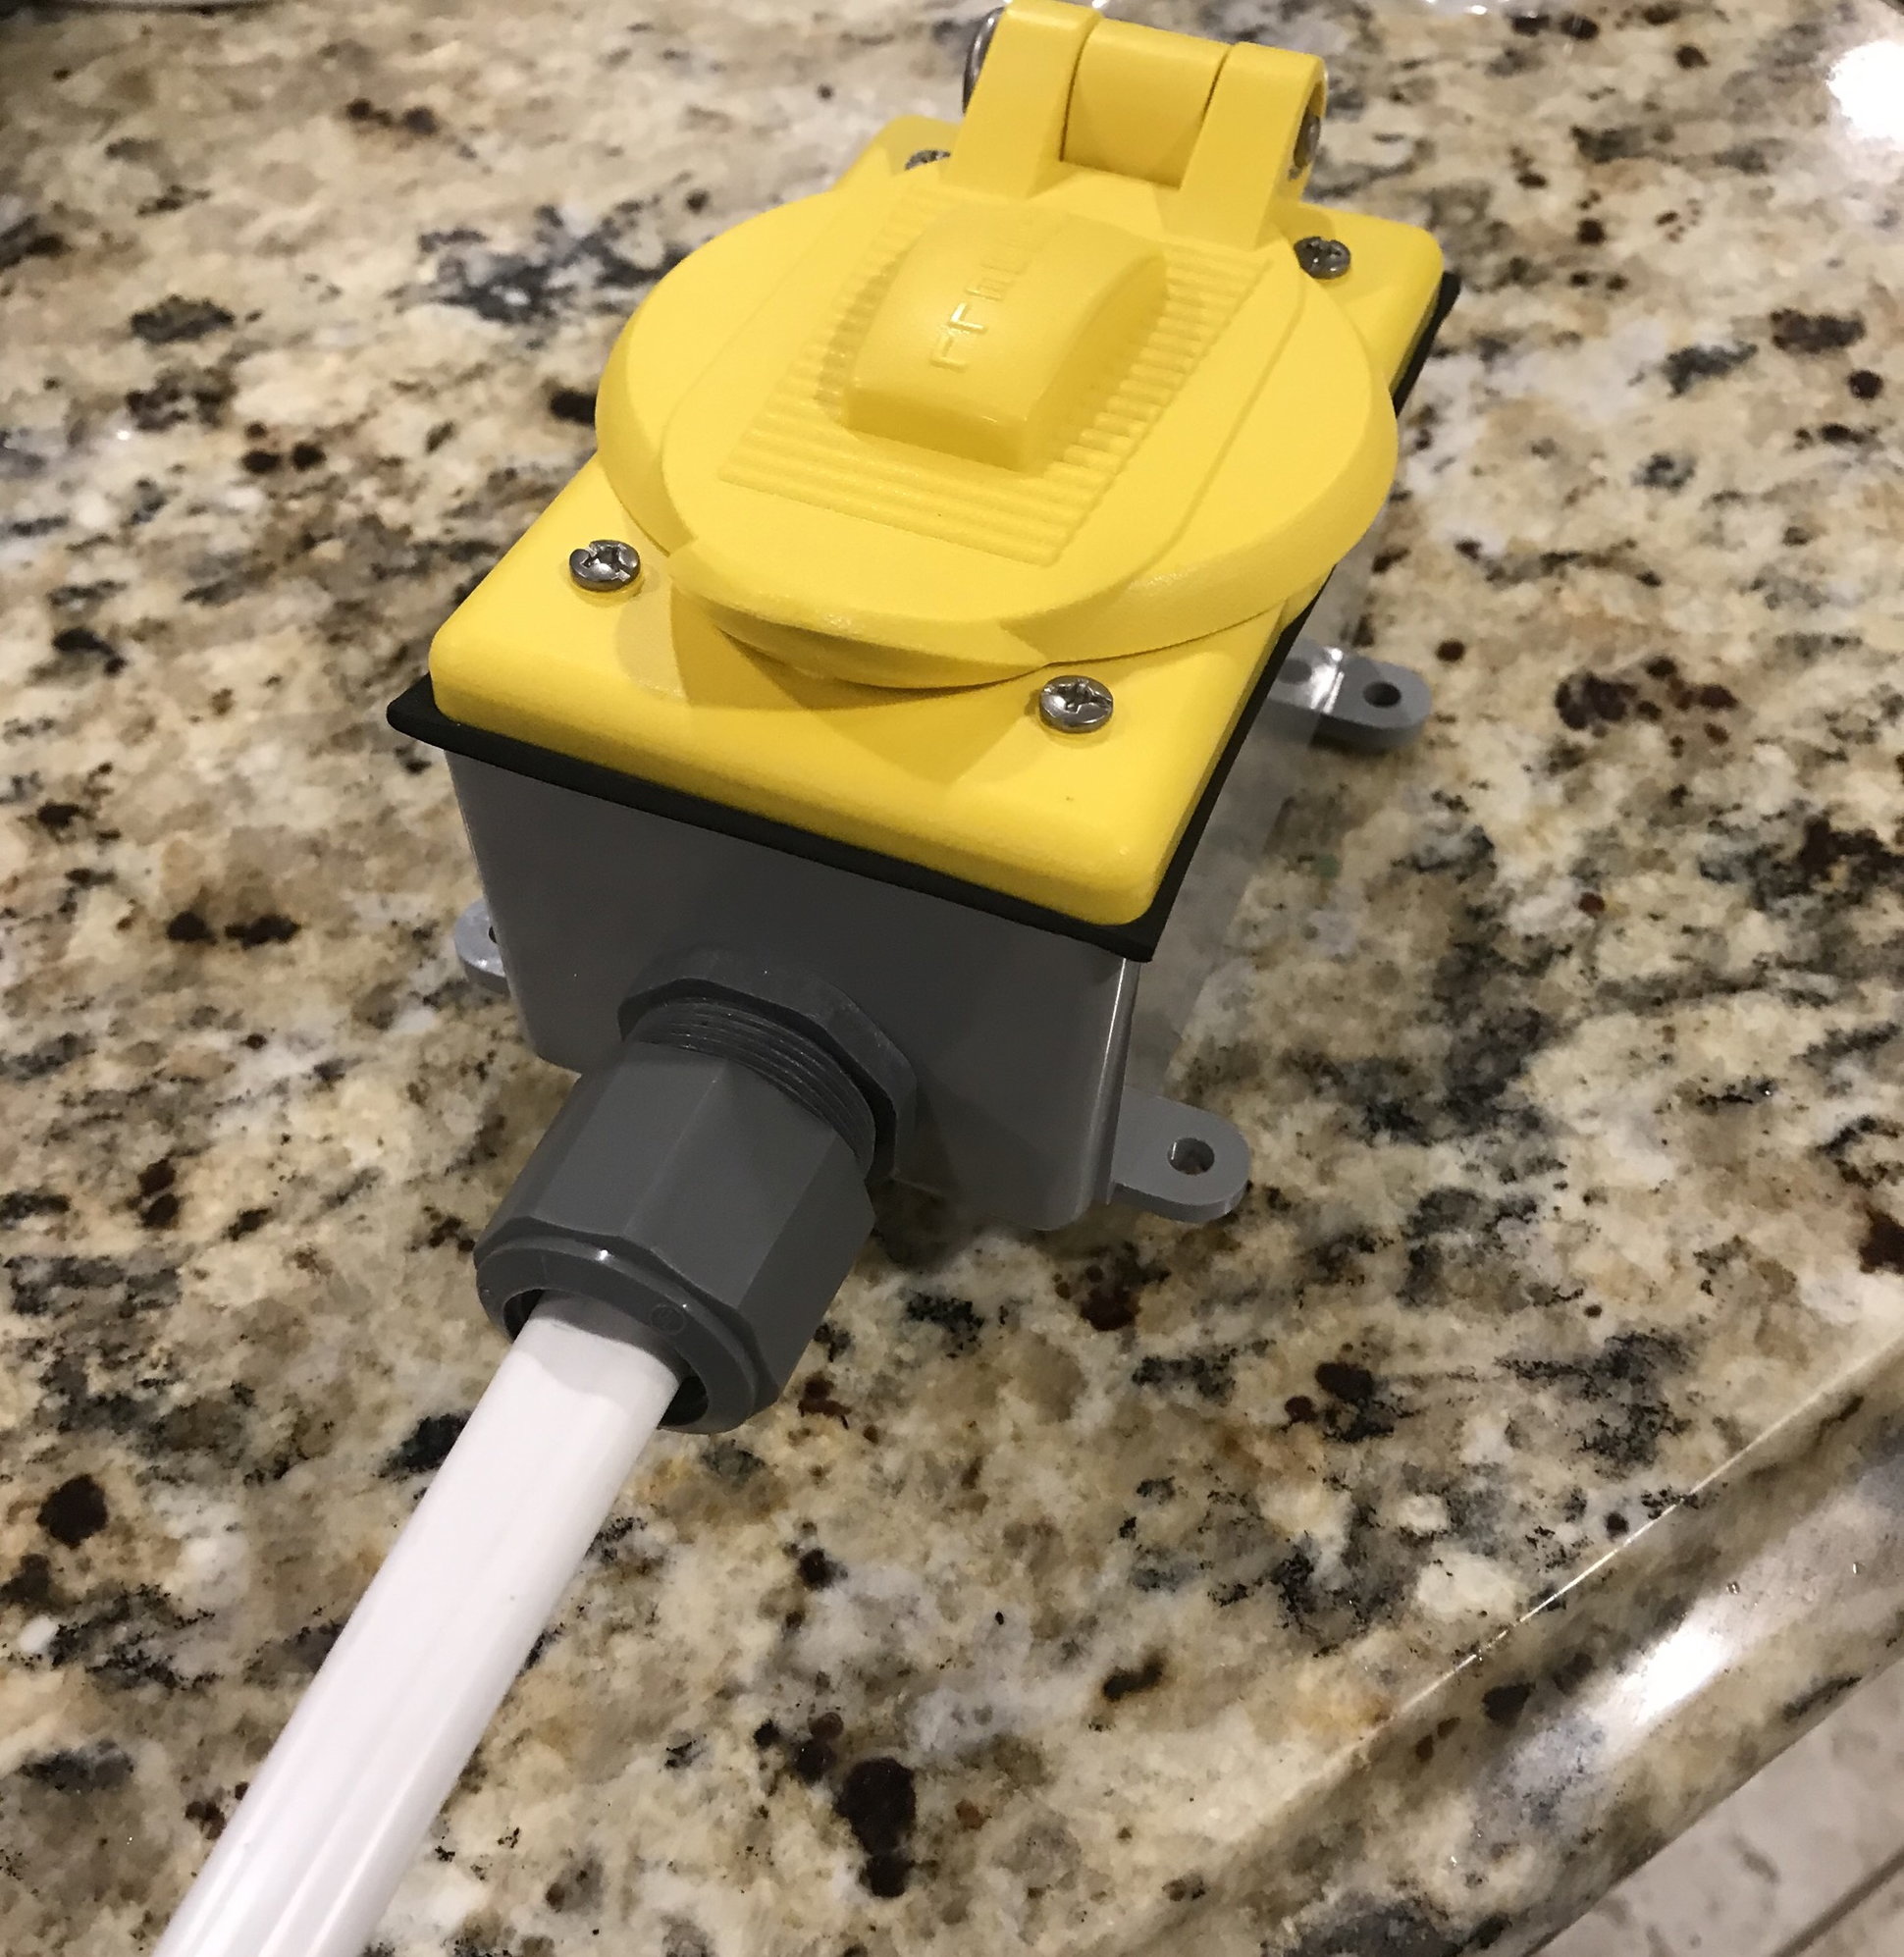 Installed 12V plug for Electric Reel? - The Hull Truth - Boating and  Fishing Forum